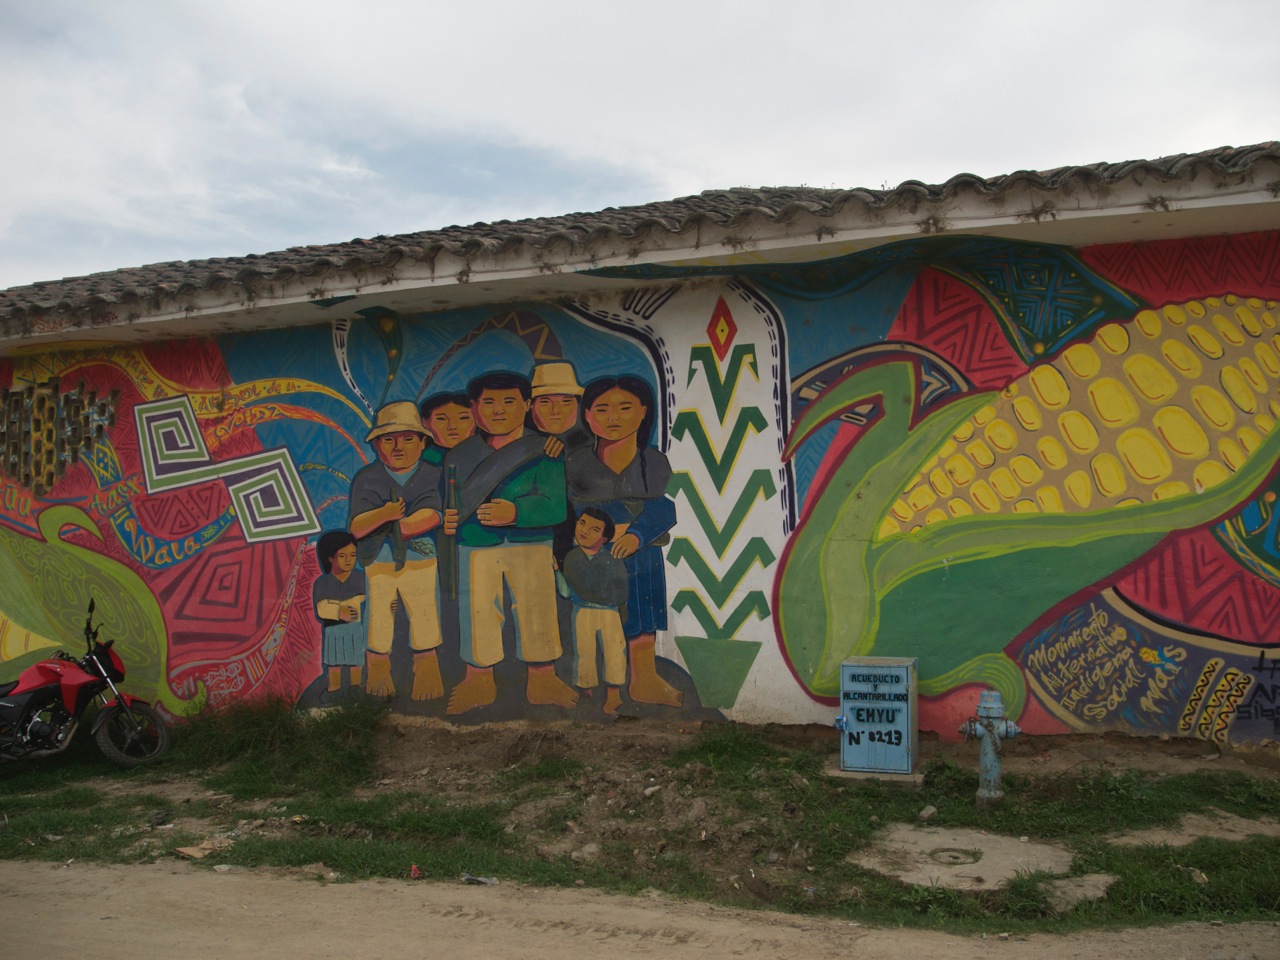 Murals in the town of Toribio, Colombia image